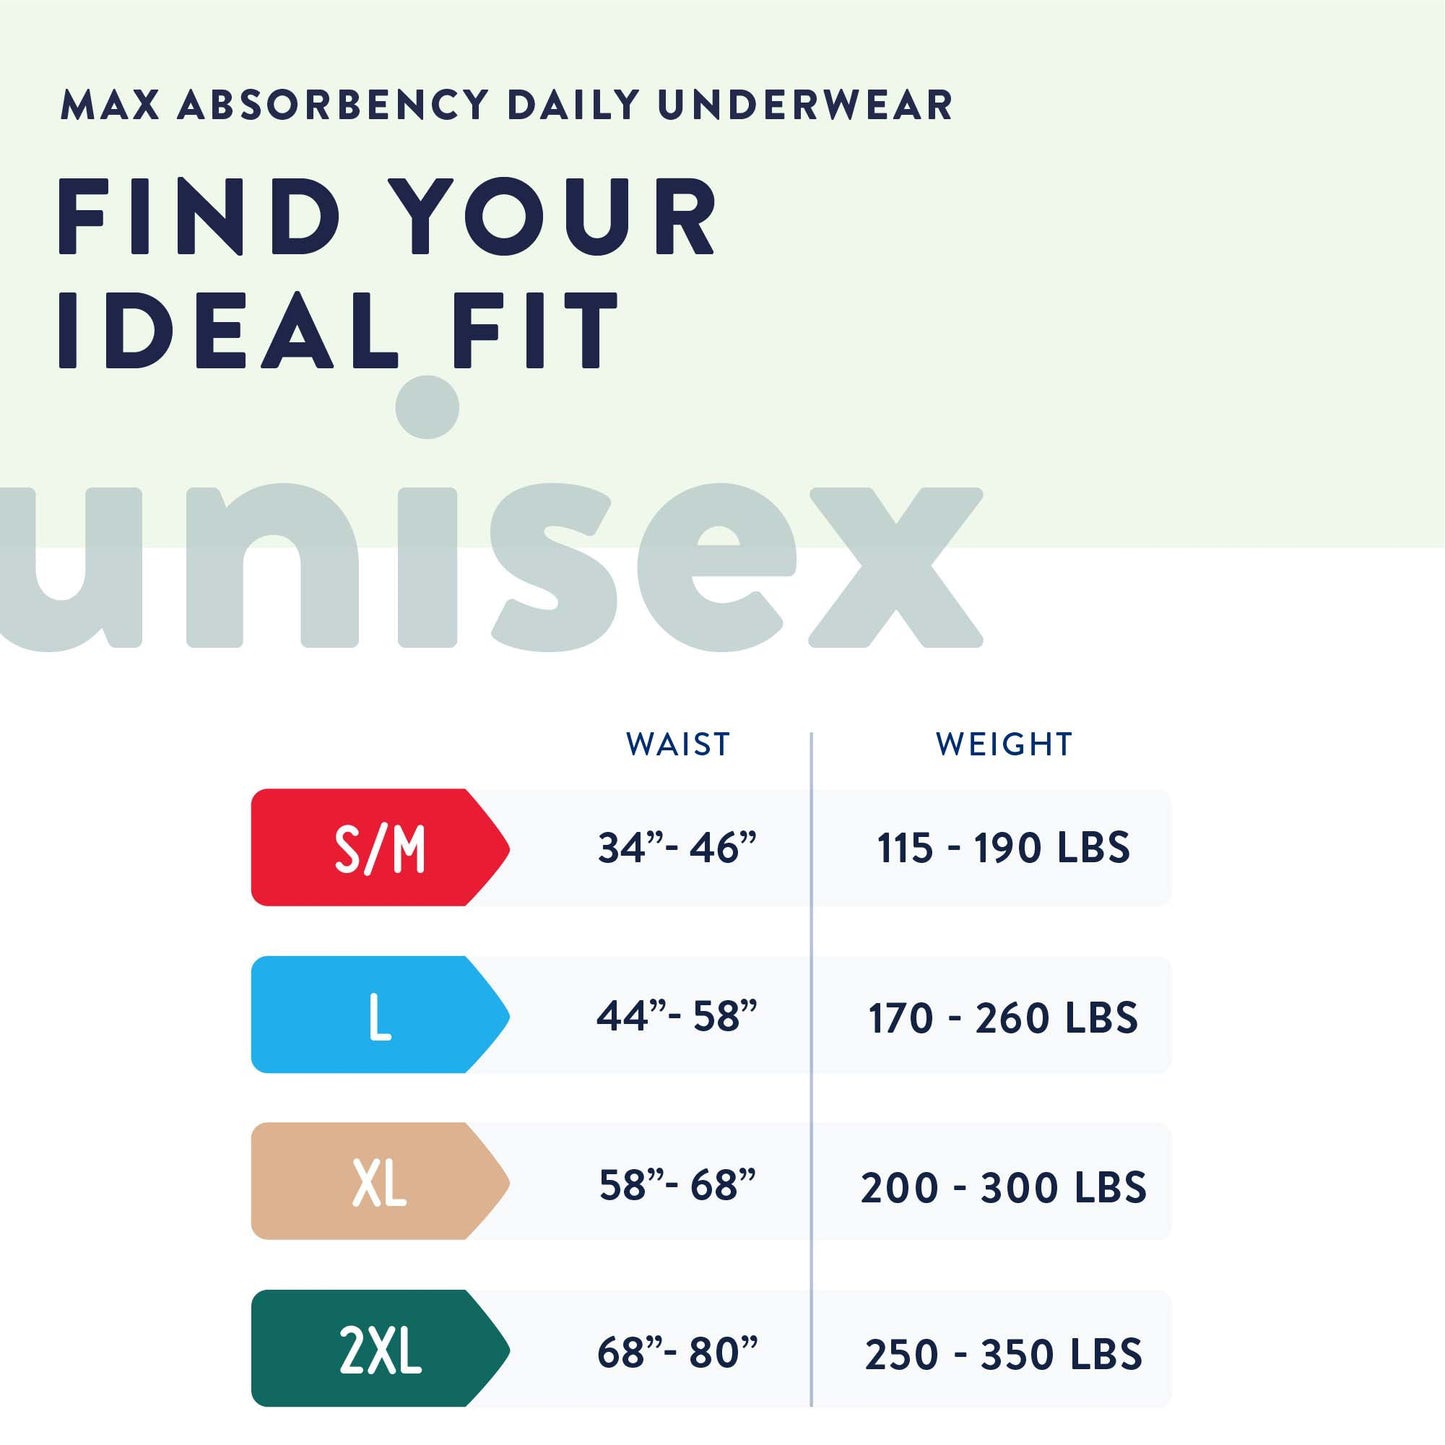 Prevail® Daily Max Absorbency Underwear, Small/Medium, 18 ct.